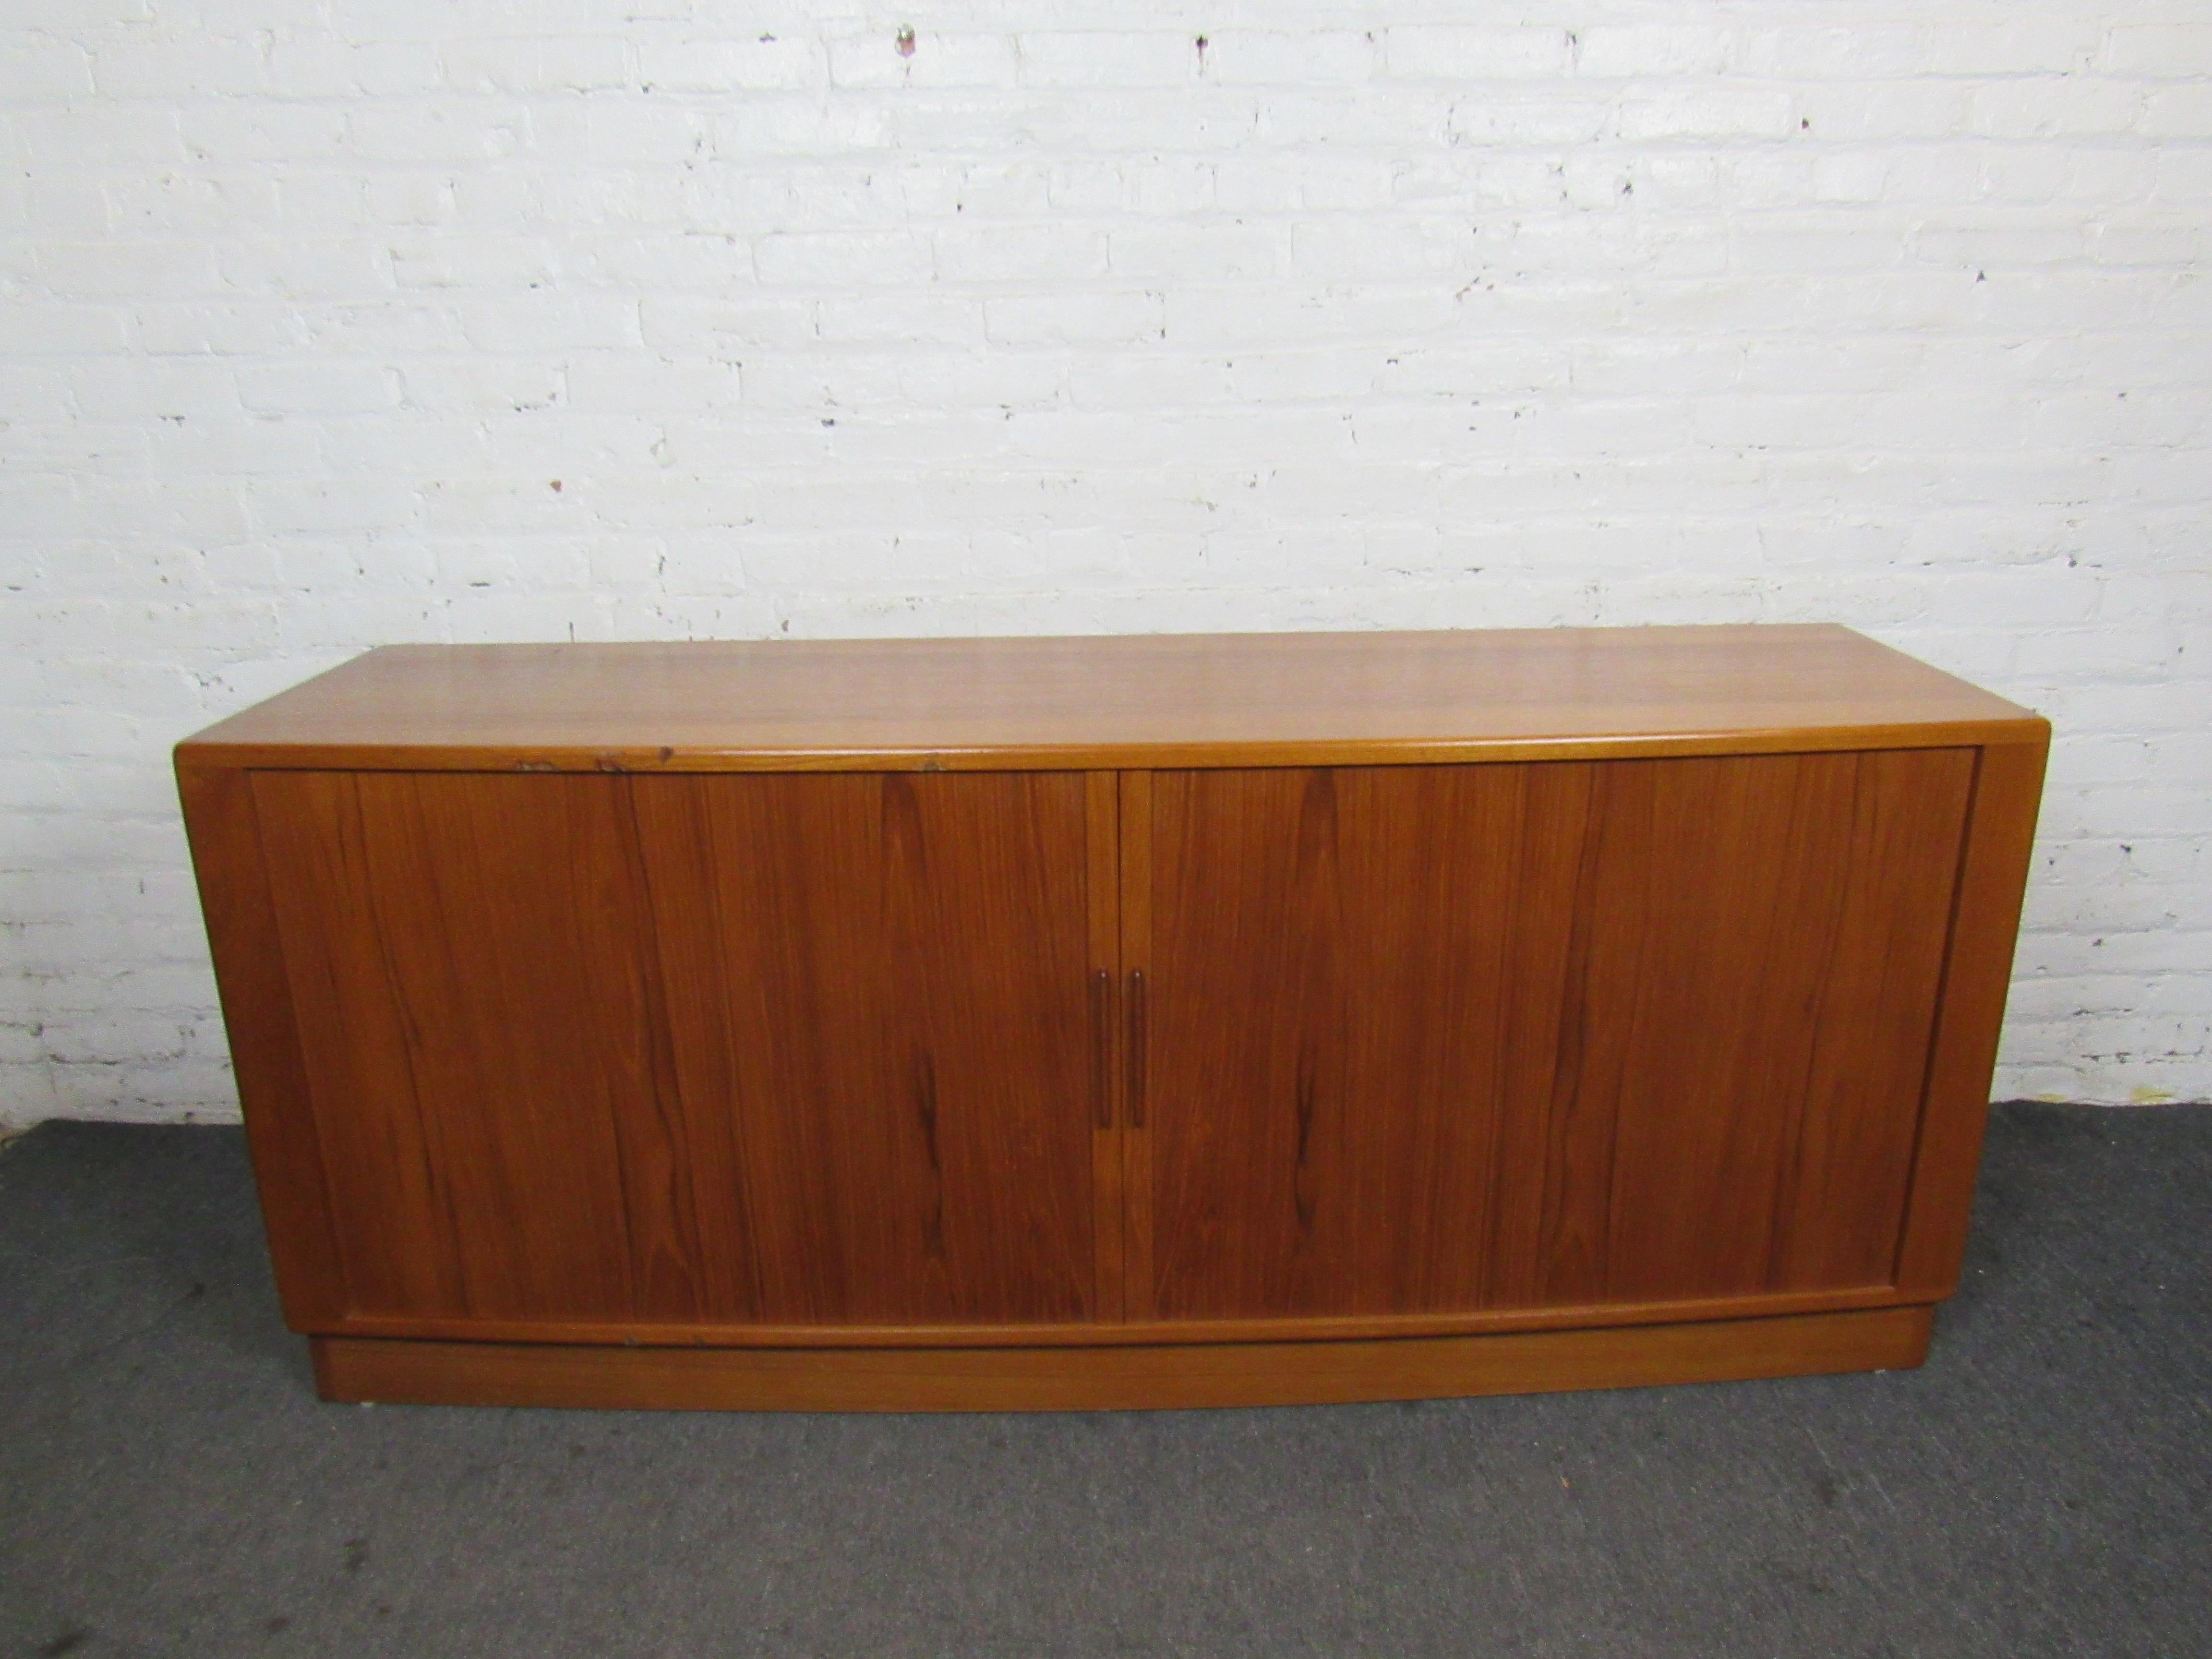 This large Mid-Century Modern credenza offers plenty of storage behind sliding doors and a clean understated design. Teak wood and quality craftsmanship make it a beautiful investment for any home or office. 
Please confirm item location with